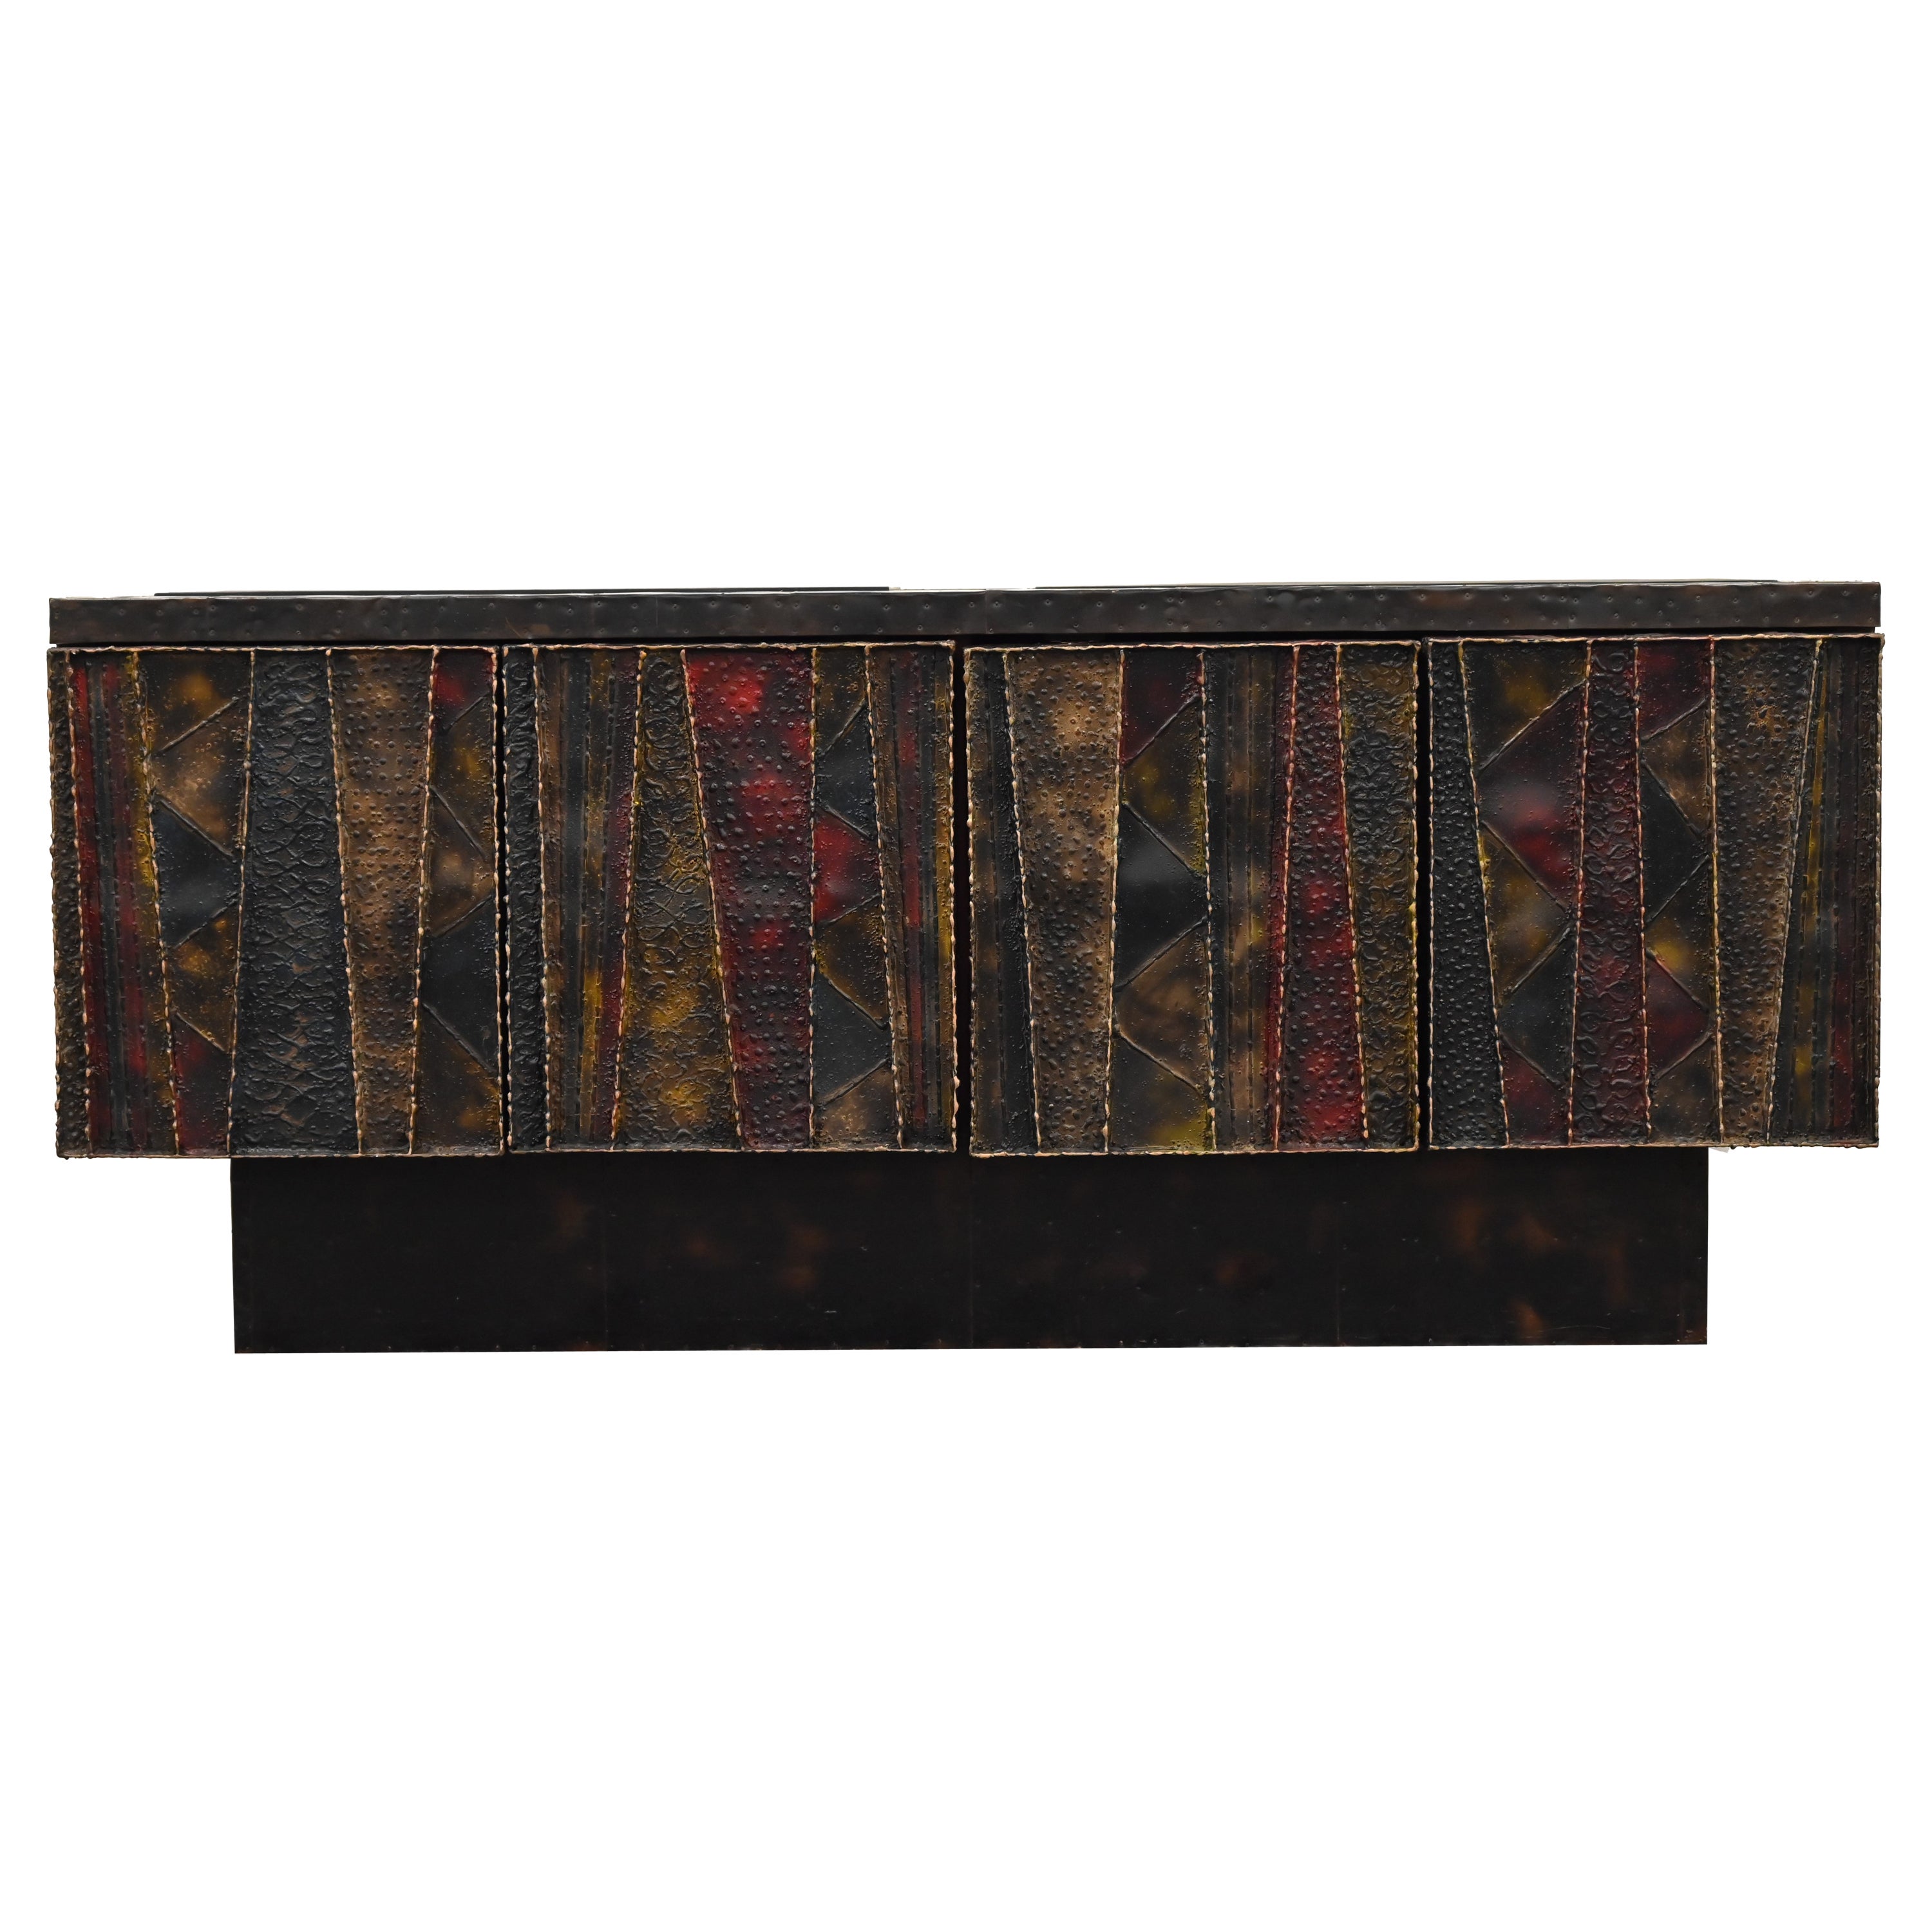 "Deep Relief Credenza" by Paul Evans Signed and Dated, 1972